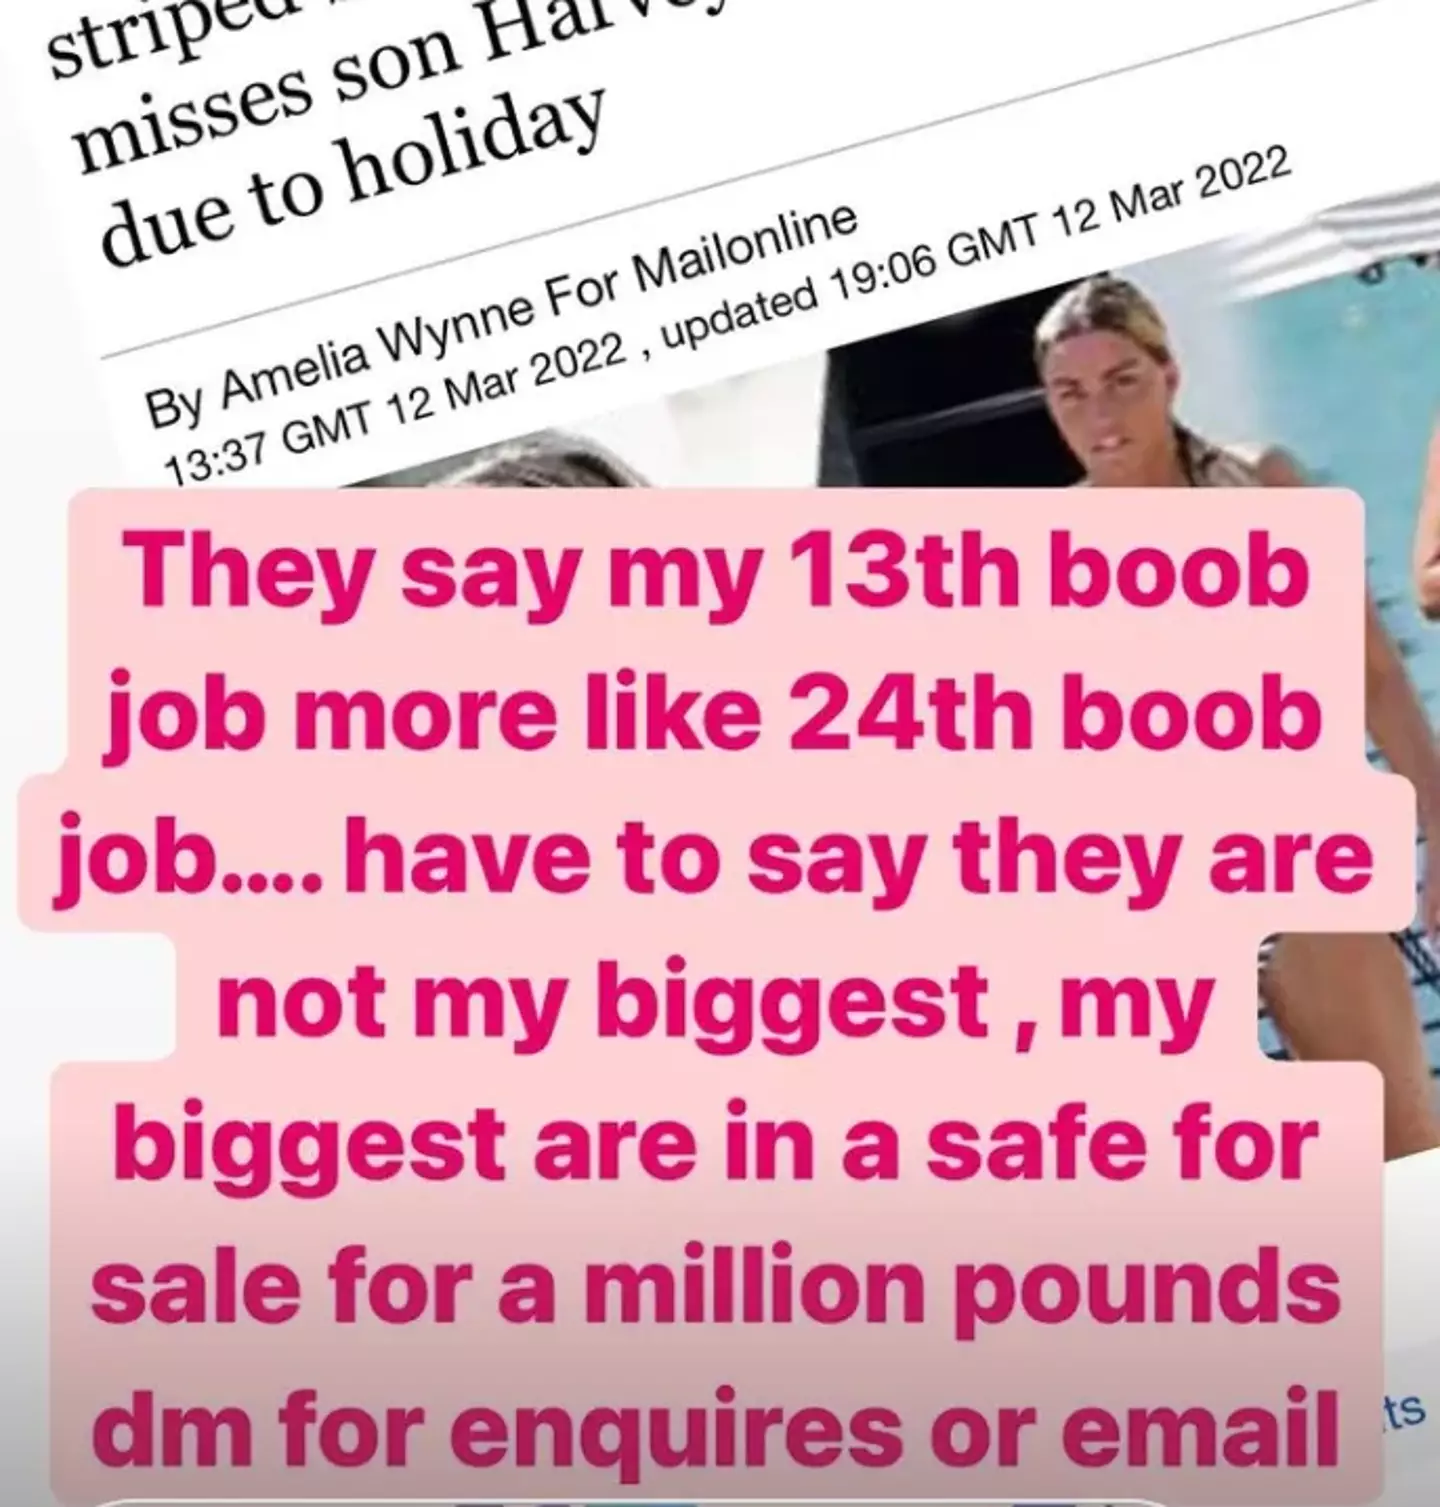 Katie Price's Instagram story confirming her breasts are up for sale.